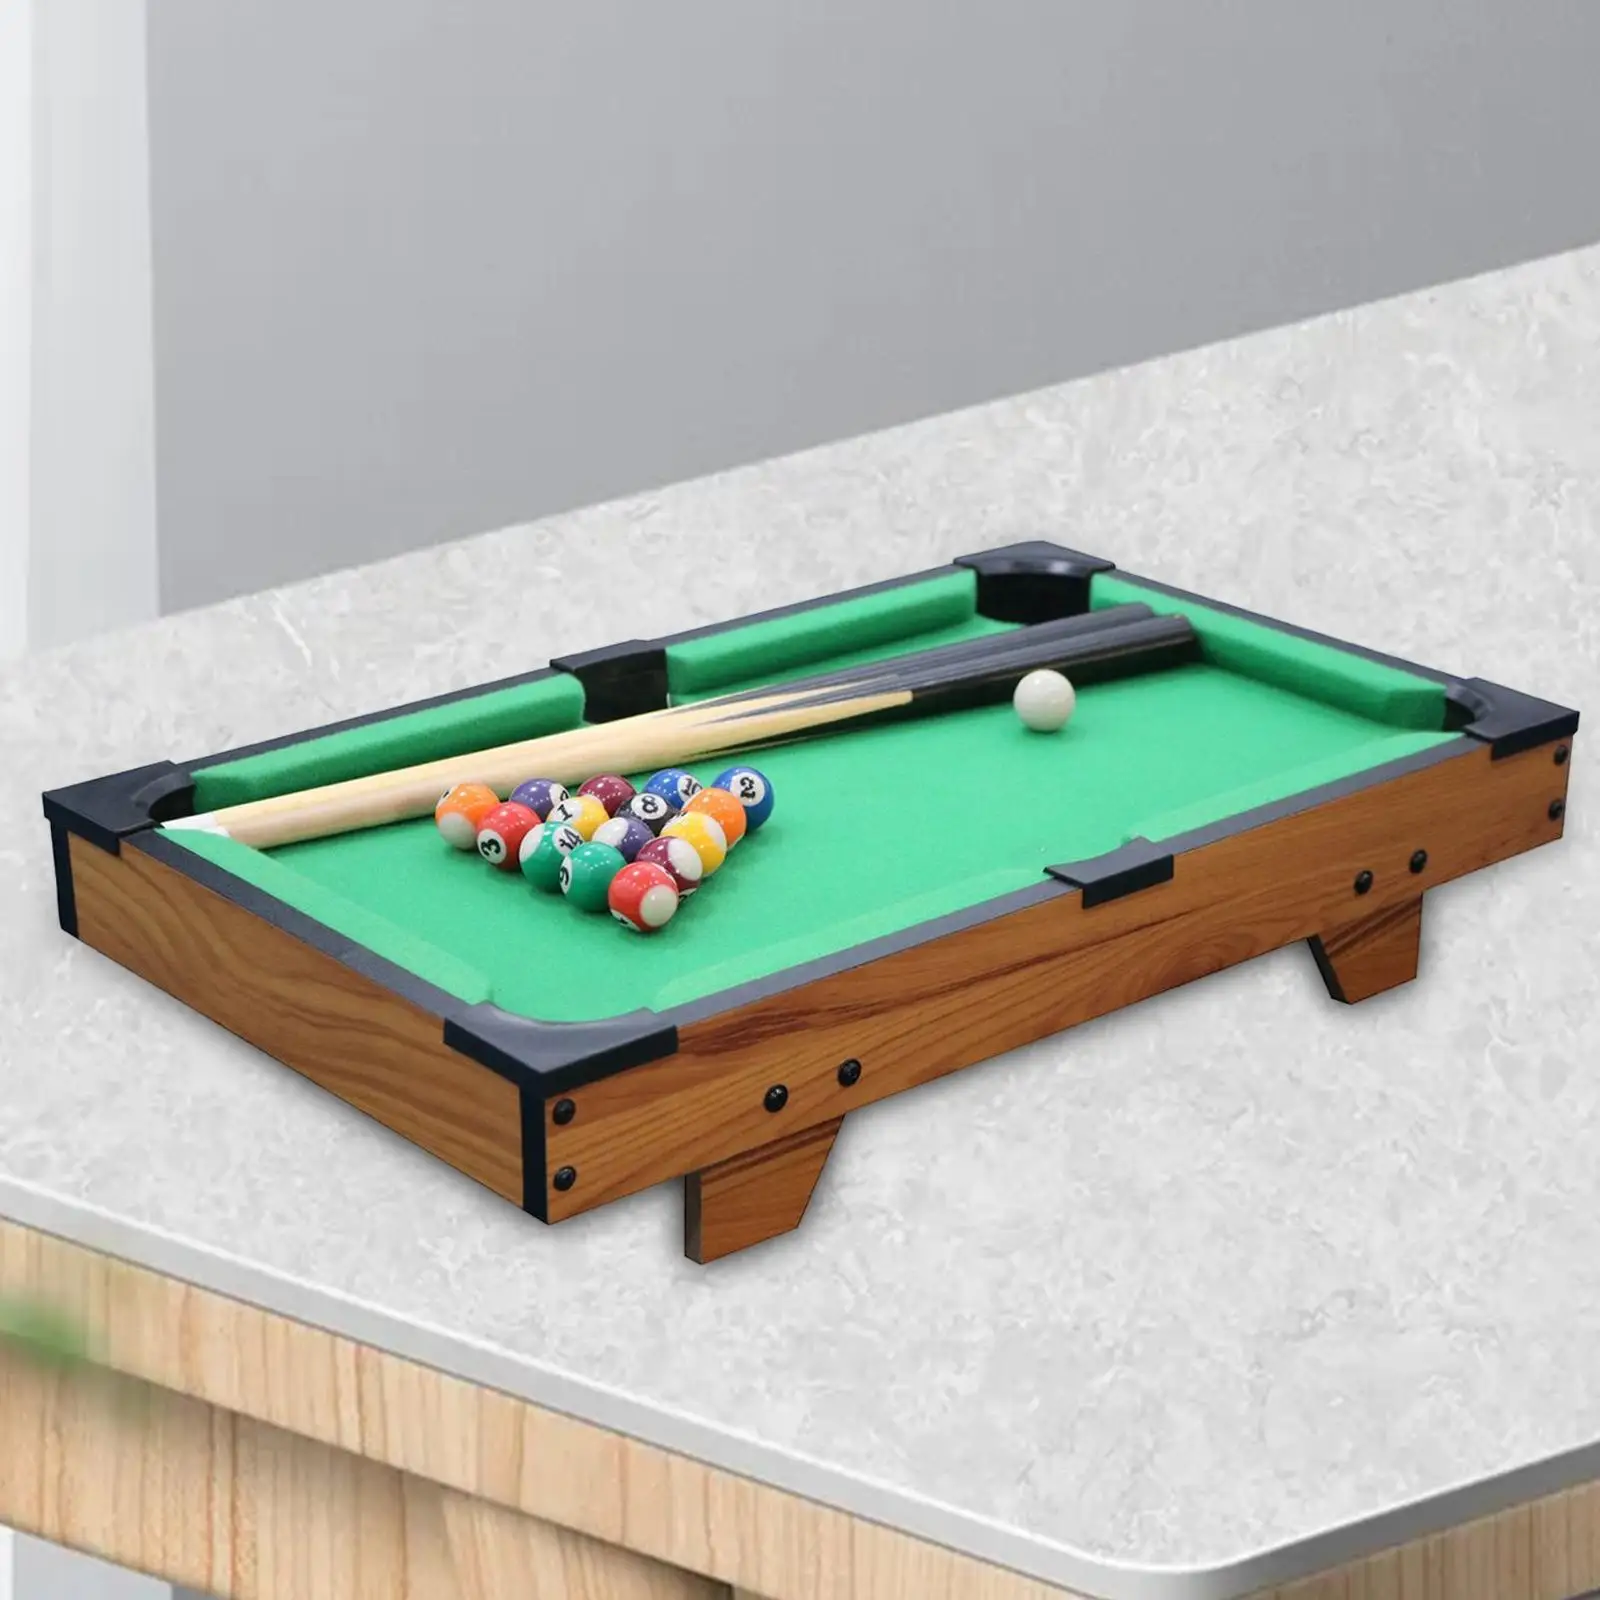 Mini Table pool with Sticks Felt Surface Game Educational Play Miniature Snooker Toy Billiards for Dorm Adults